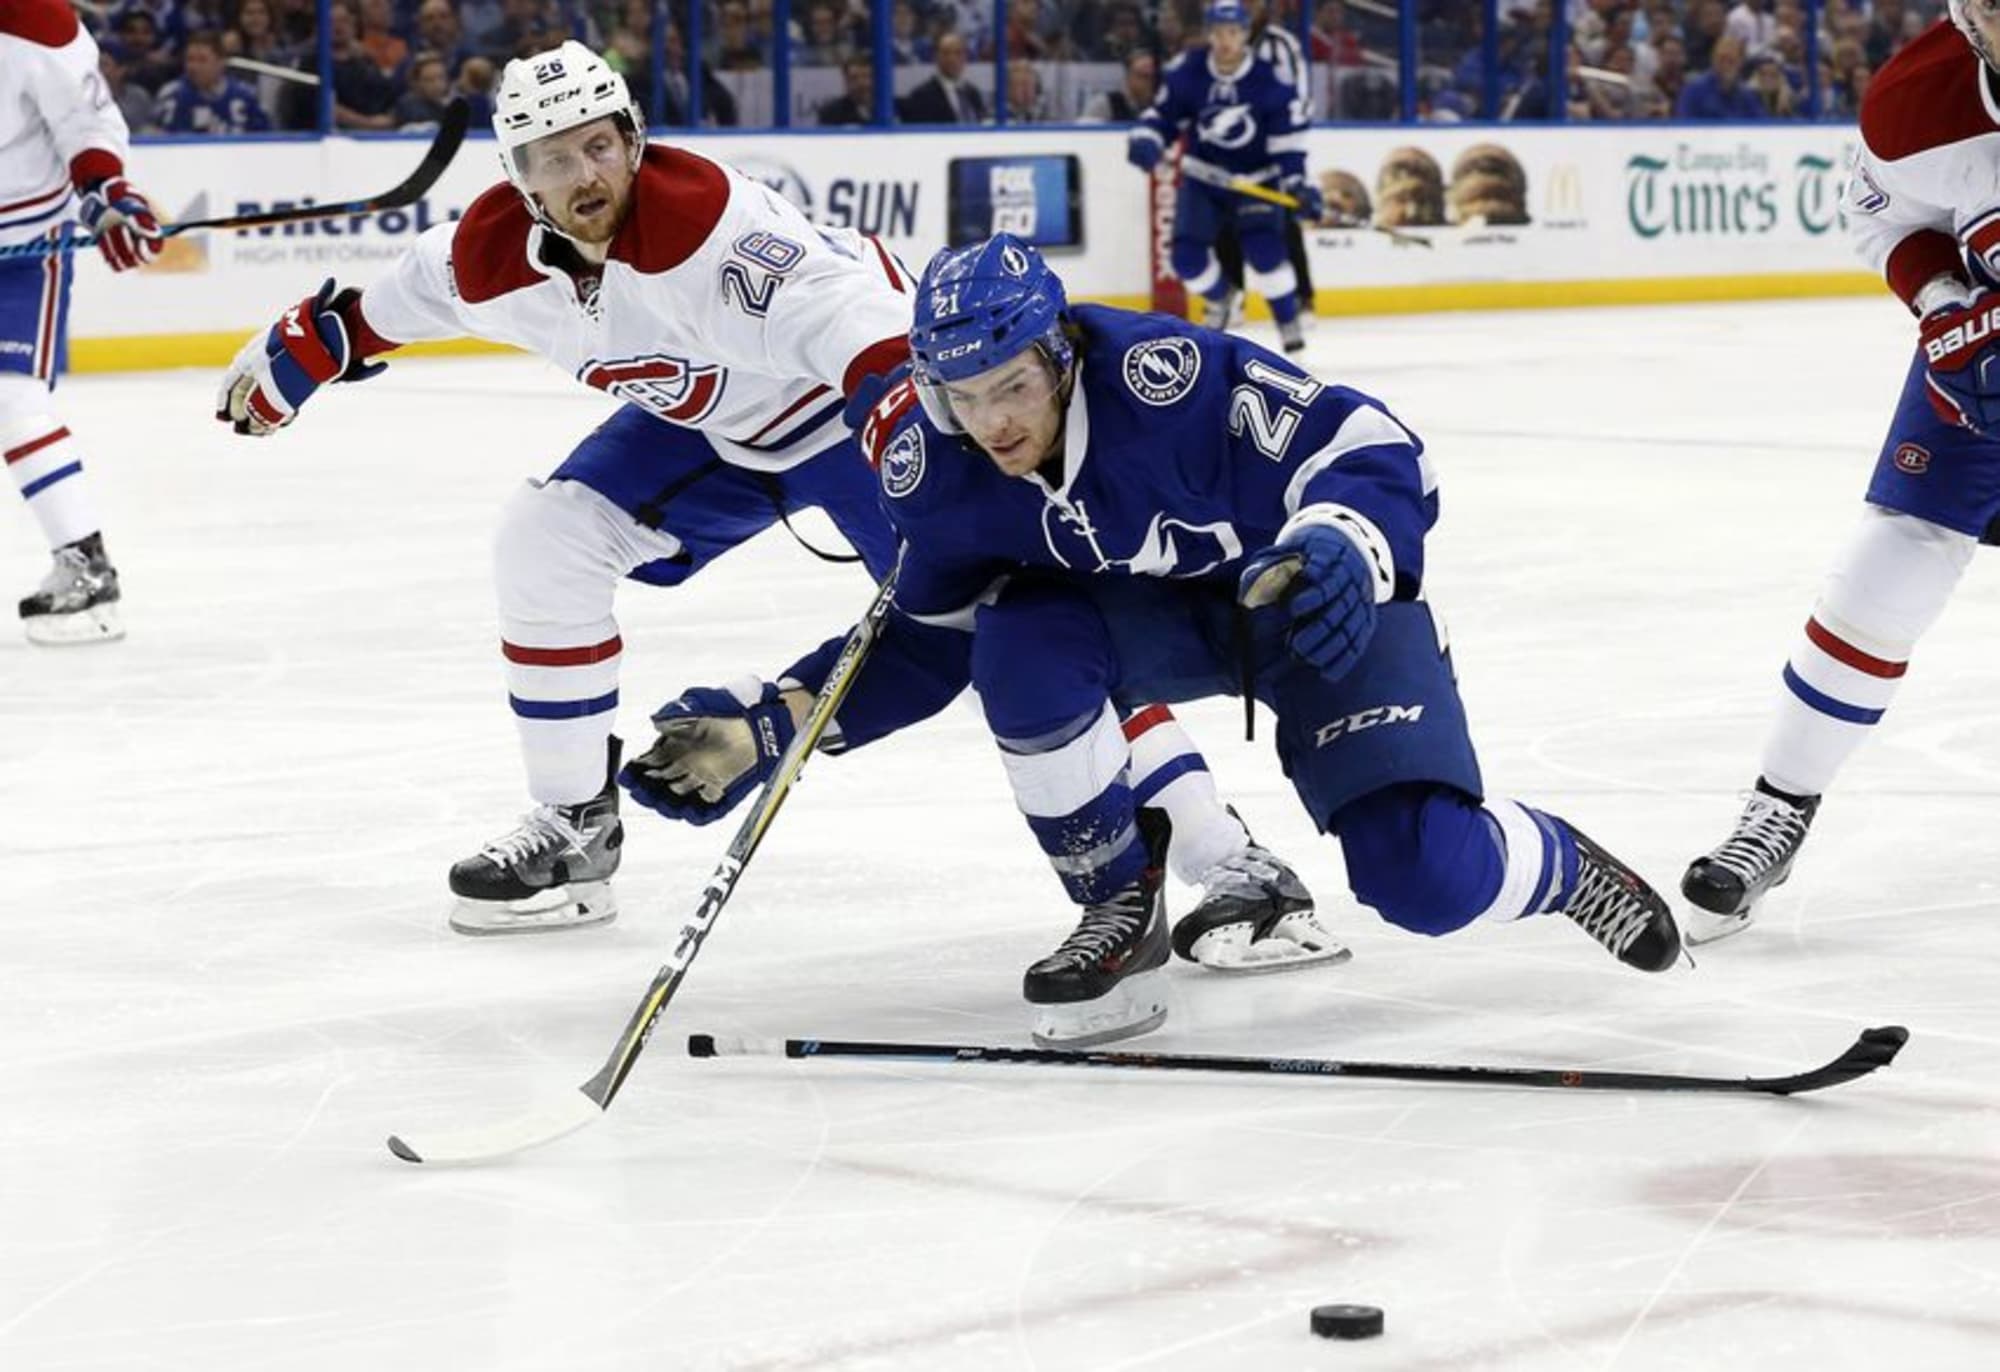 Lightning's Brayden Point expected to miss 4-6 weeks with upper-body injury